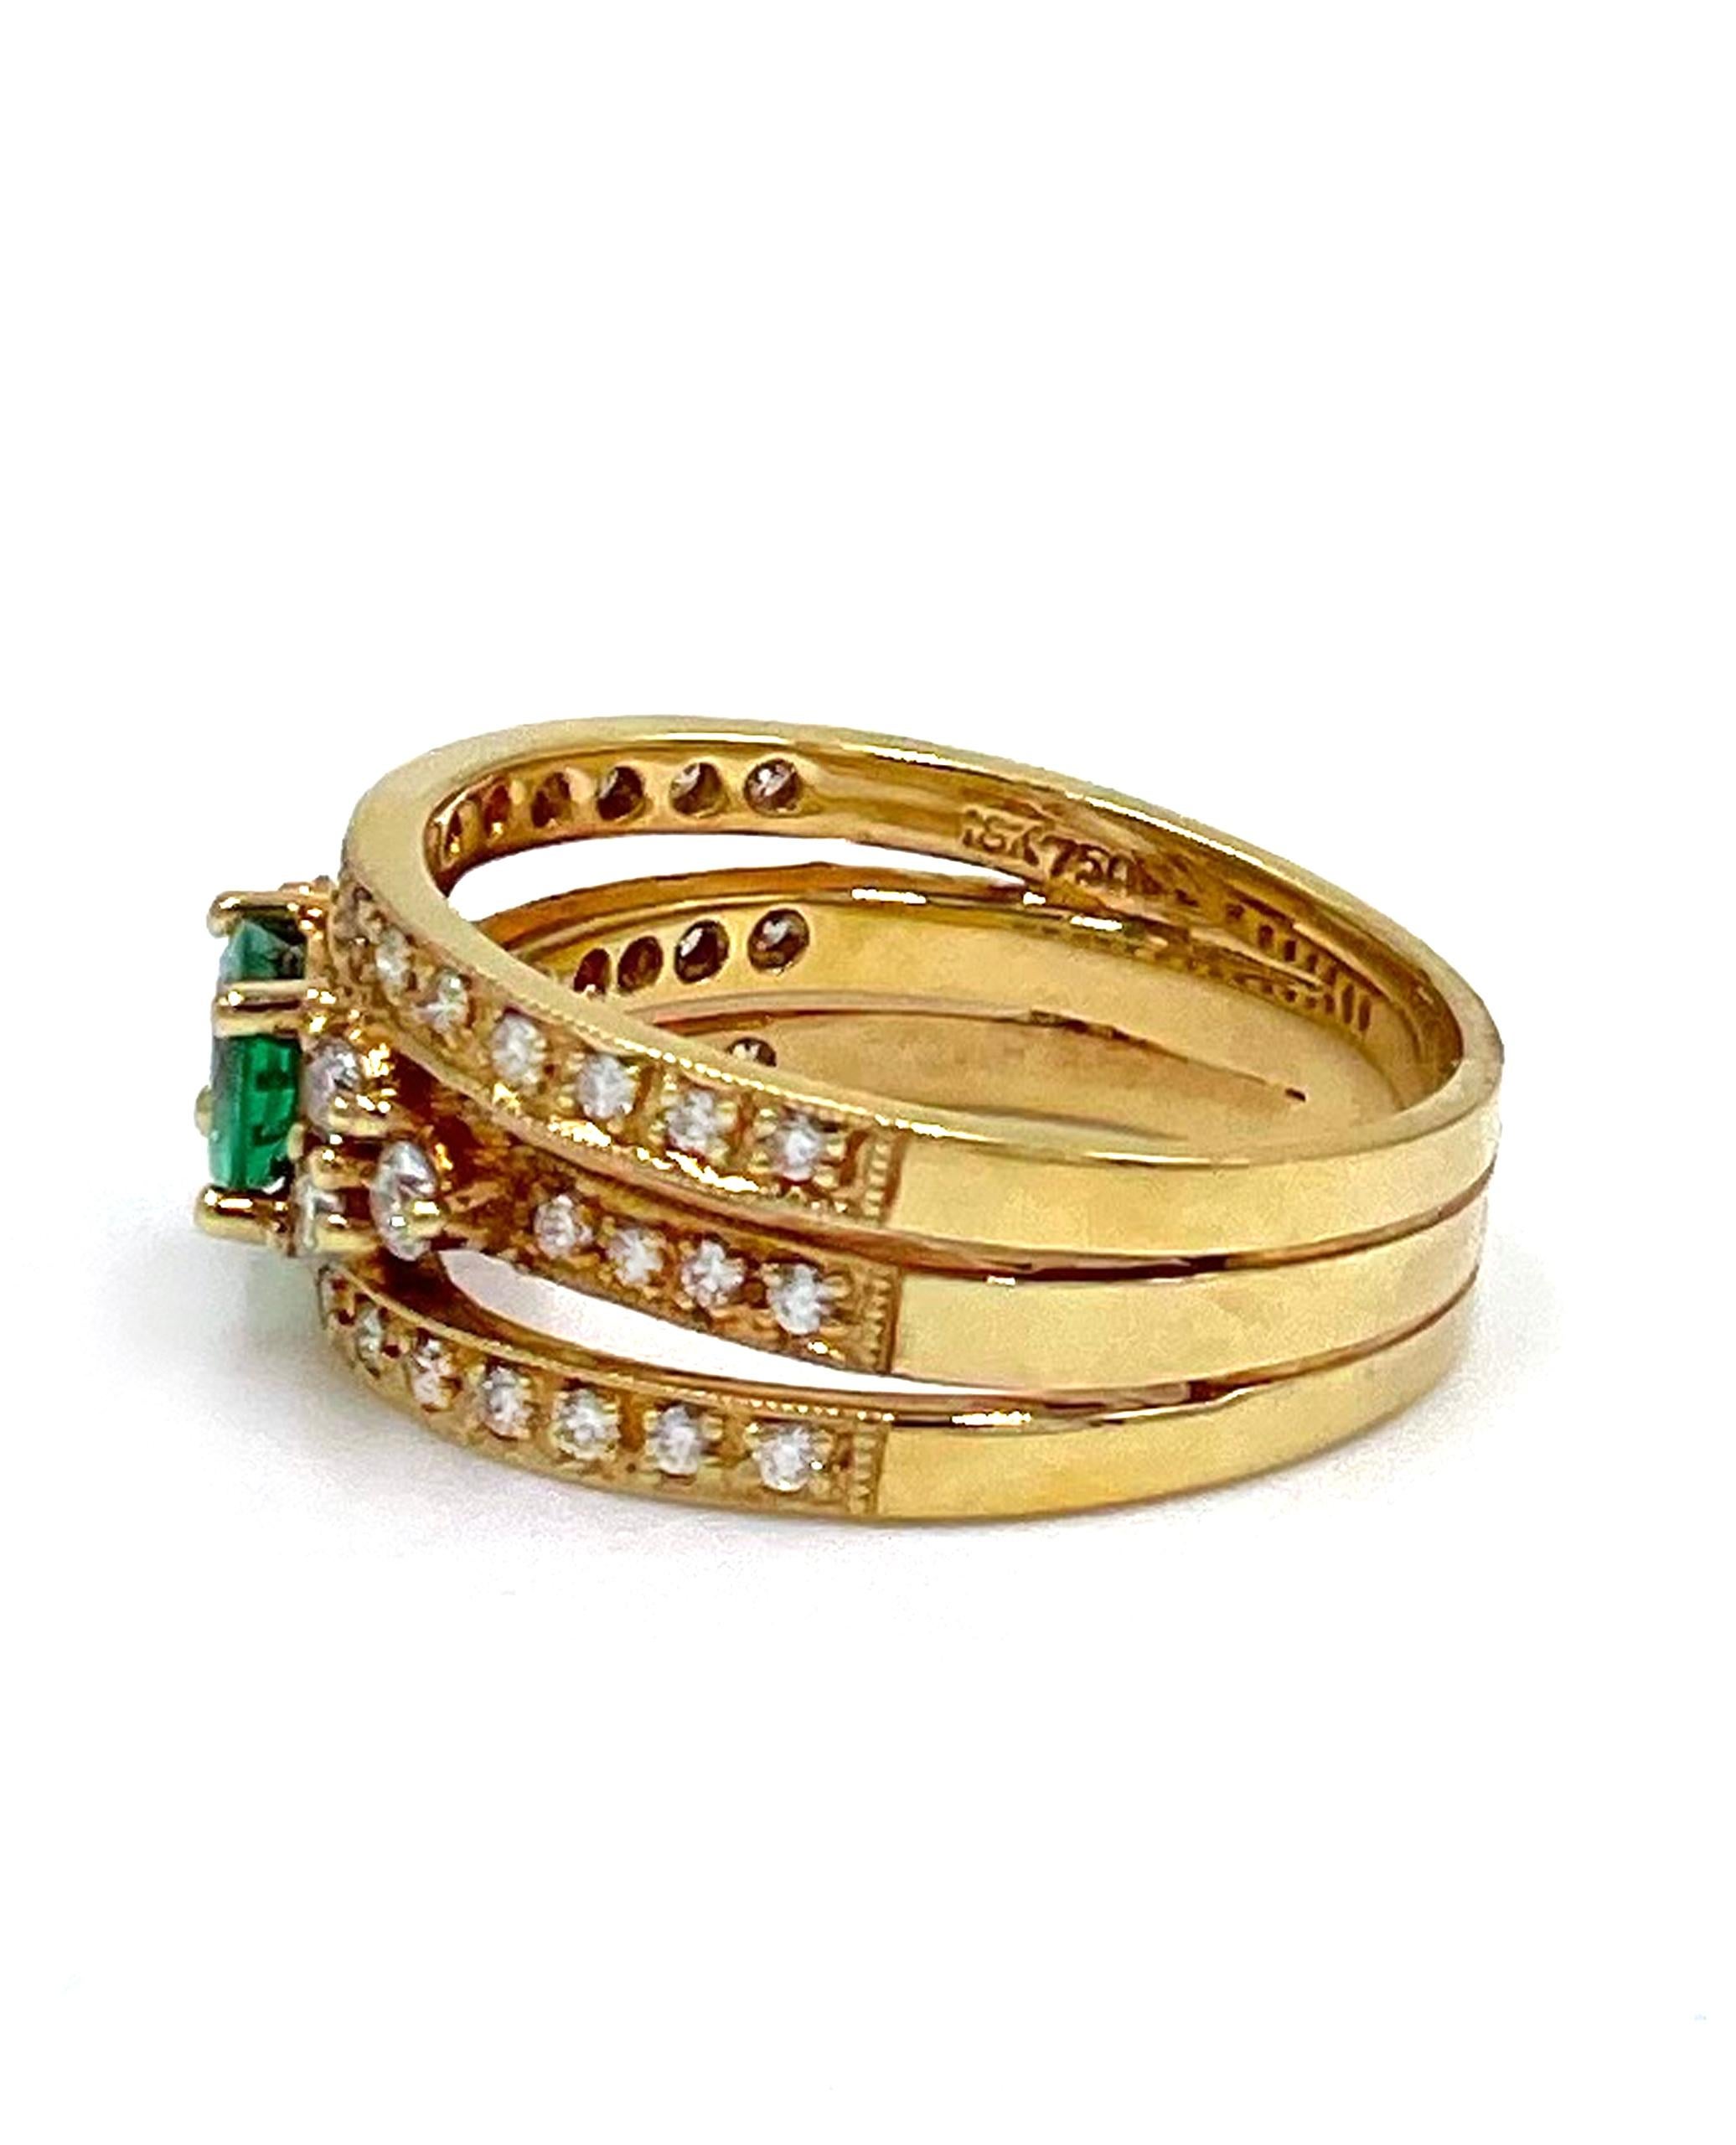 18k yellow gold multi row ring with 44 round faceted diamonds totaling 0.51 carats. In the center, 1 oval shape emerald totaling 0.58 carats.

* Finger size 6.5 tight
* Diamonds are H color, VS2/SI1 clarity.